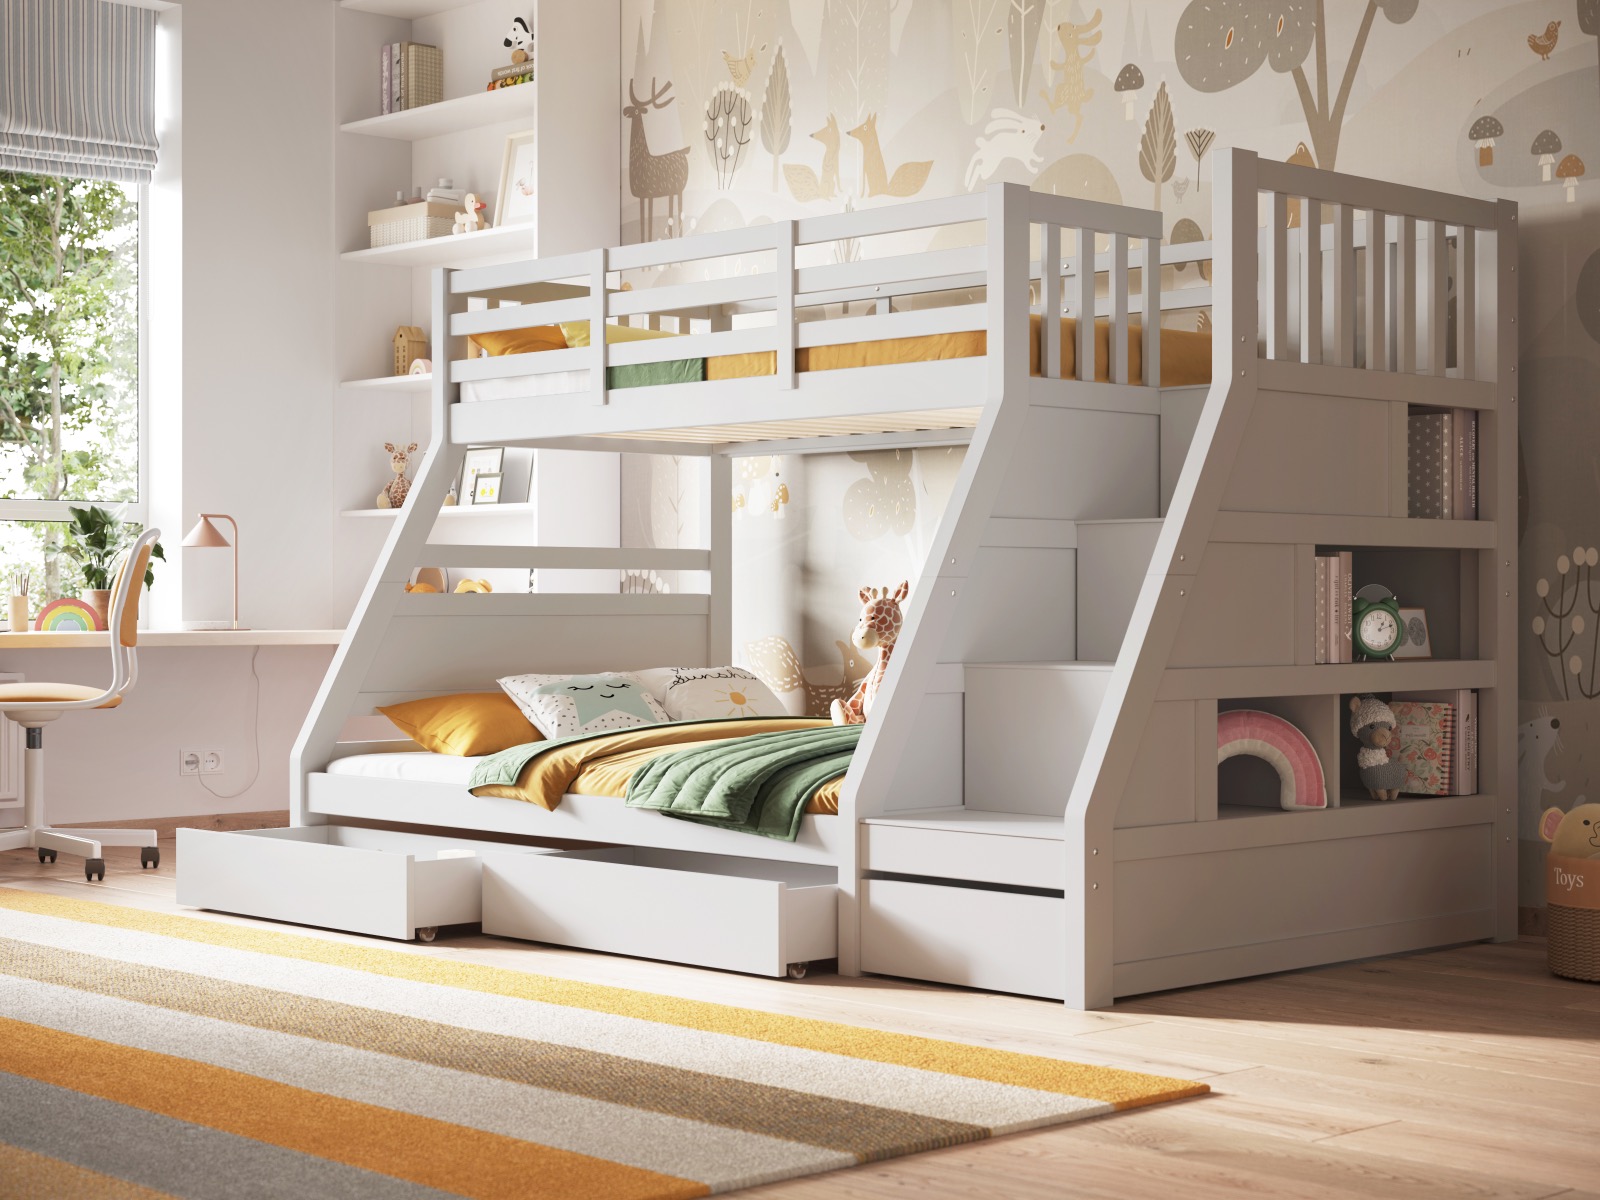 Flair Lunar Staircase Triple Bunk Bed with Shelves